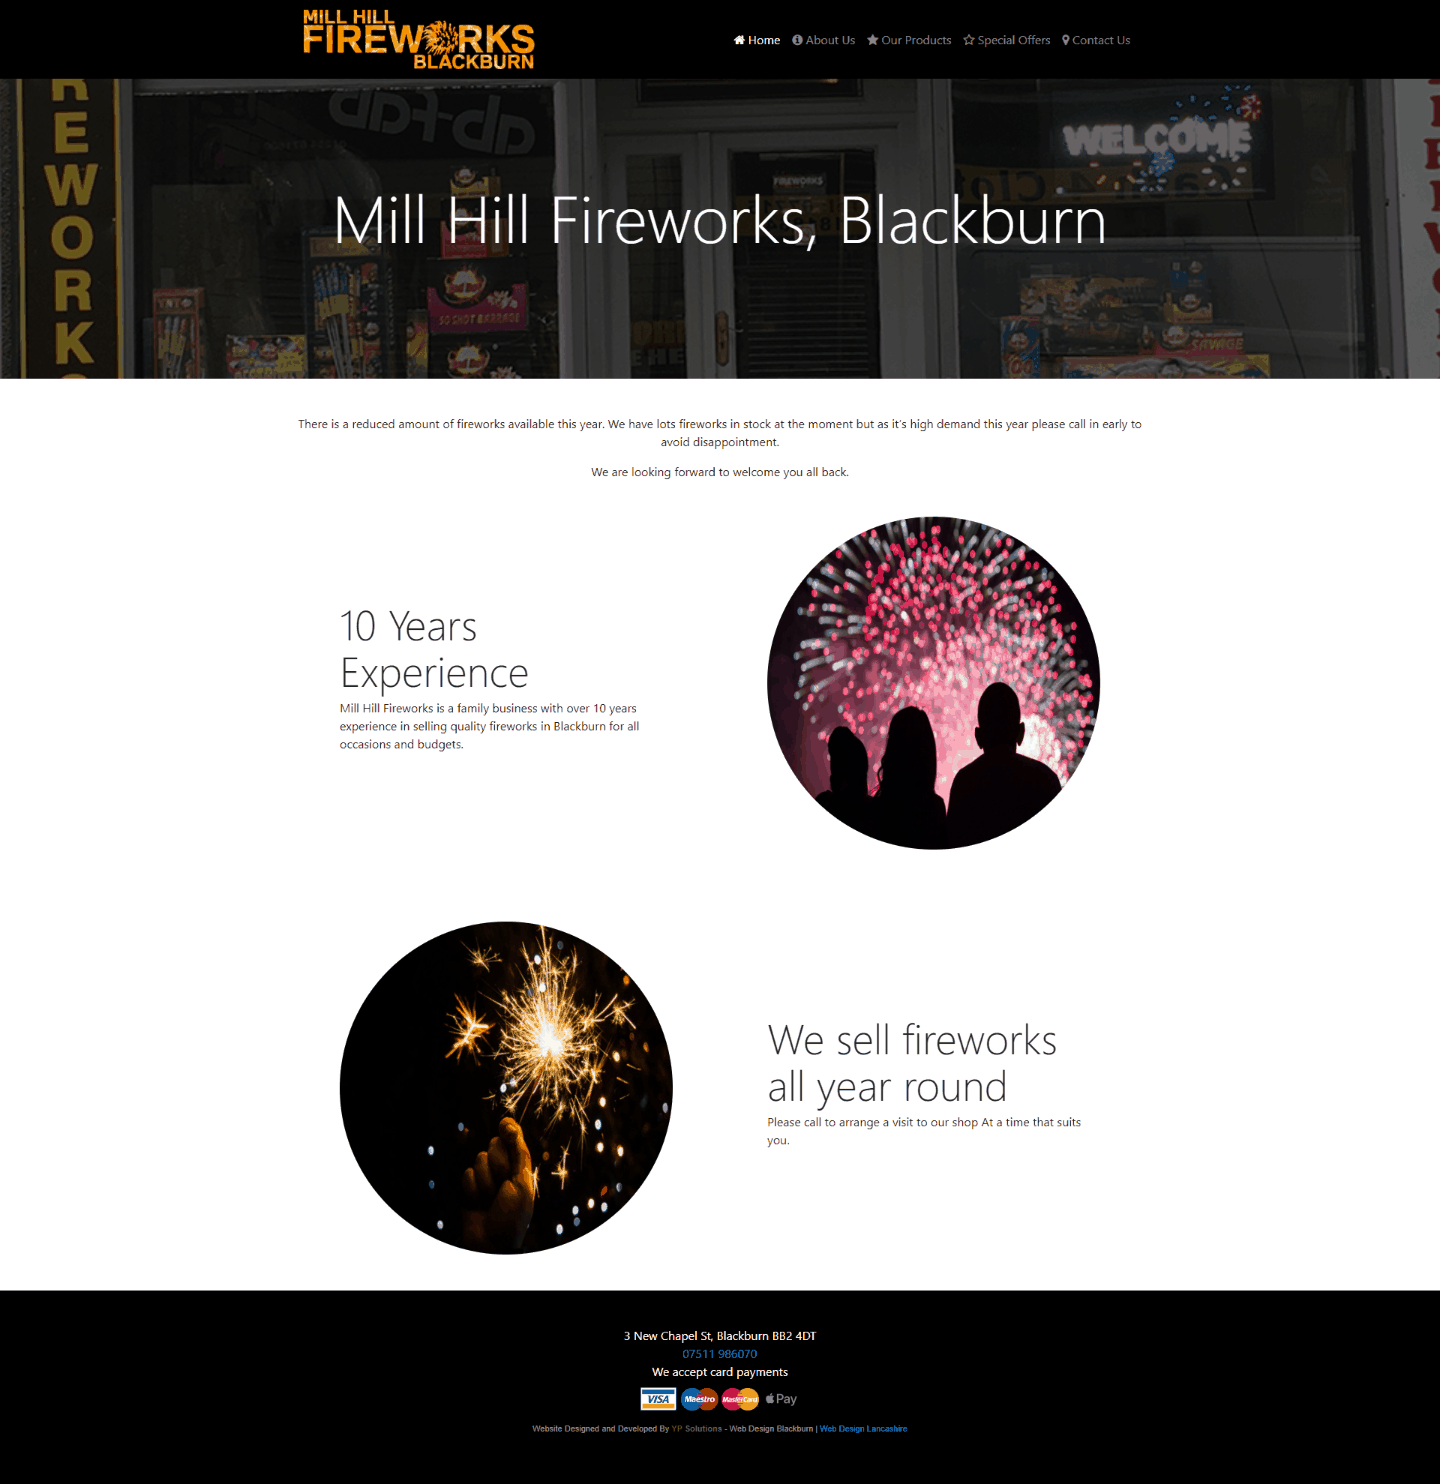 Mill Hill Fireworks Image